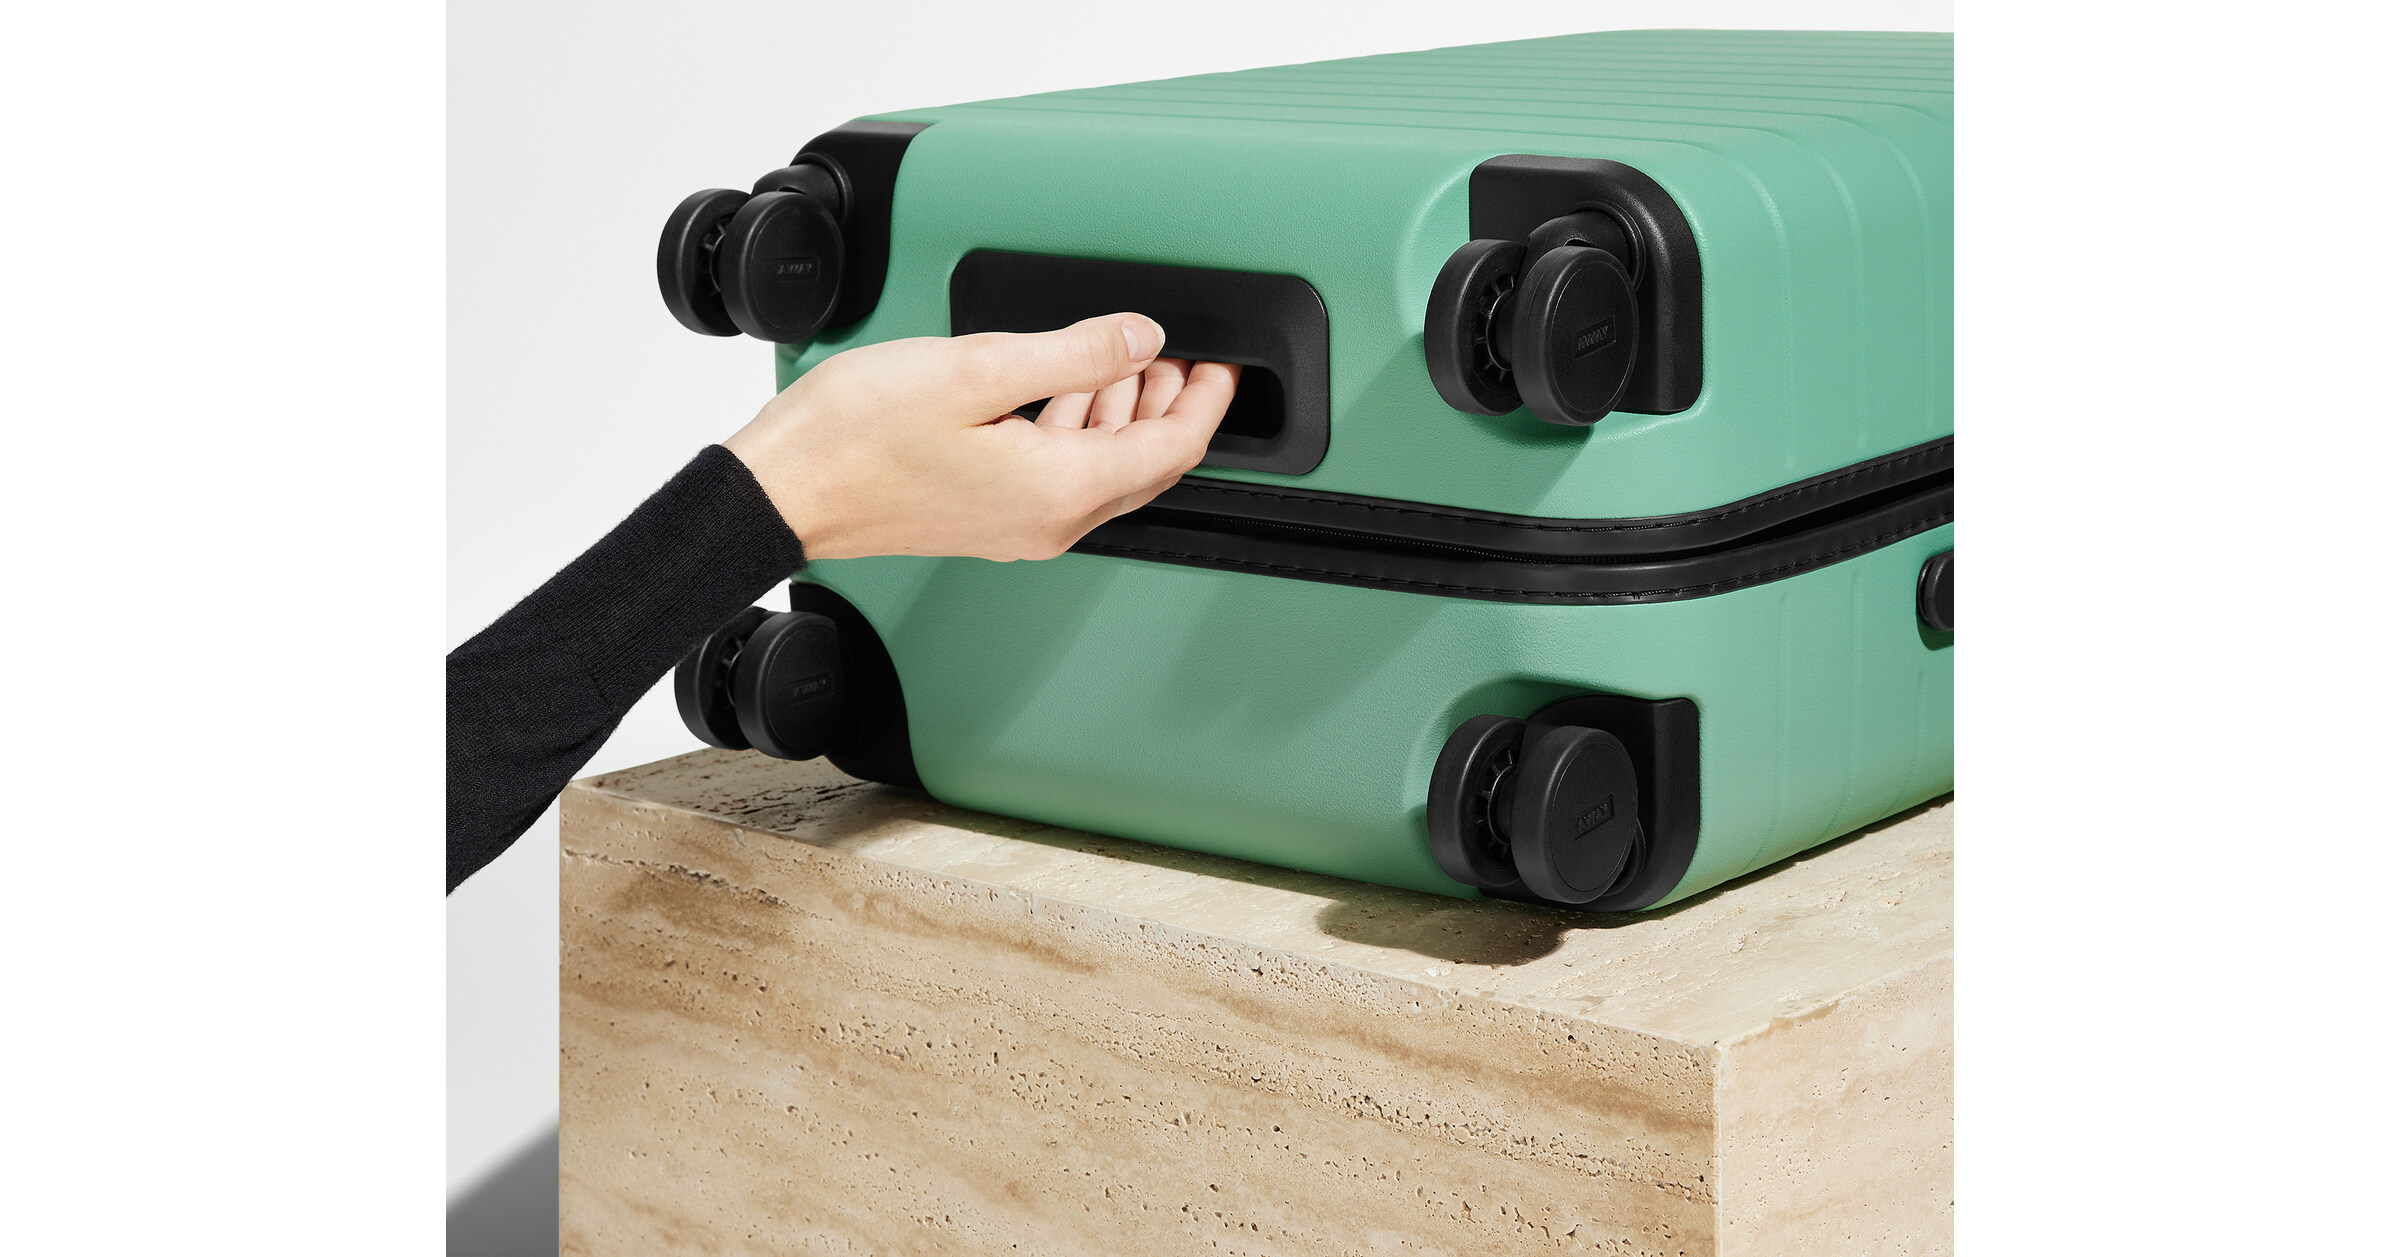 Away puts a design spin on luggage